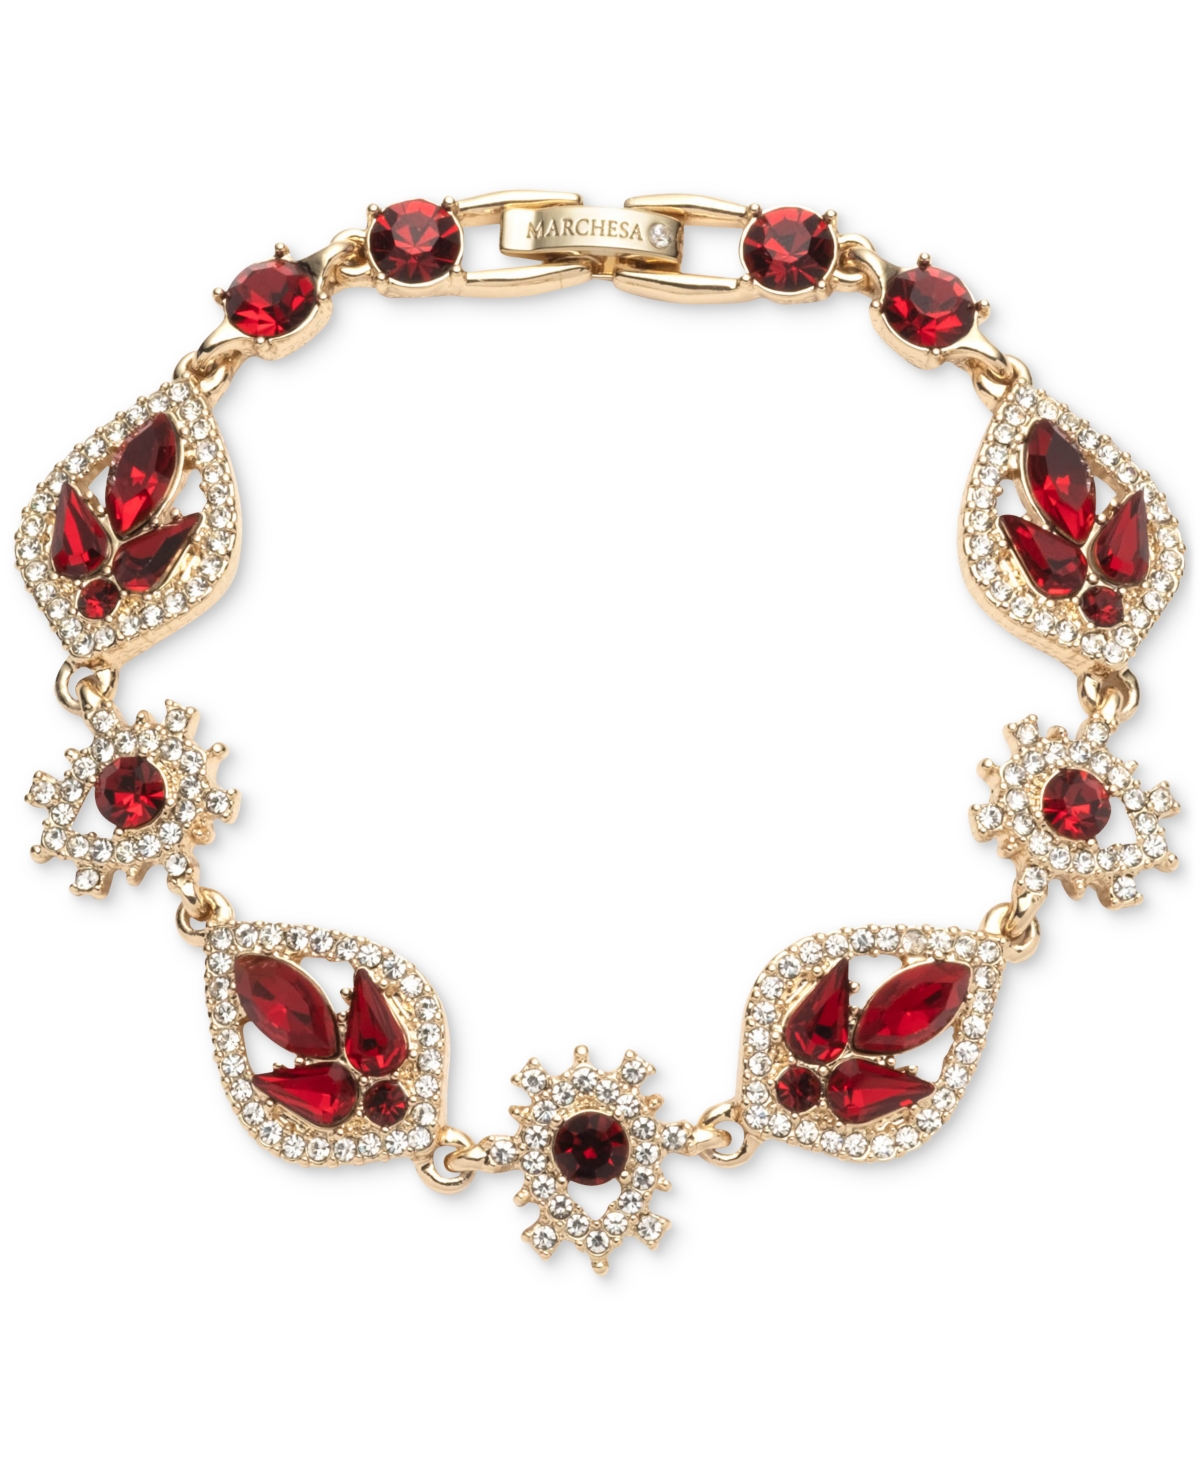 Marchesa Gold-tone Mixed Crystal Cluster Flex Bracelet In Red